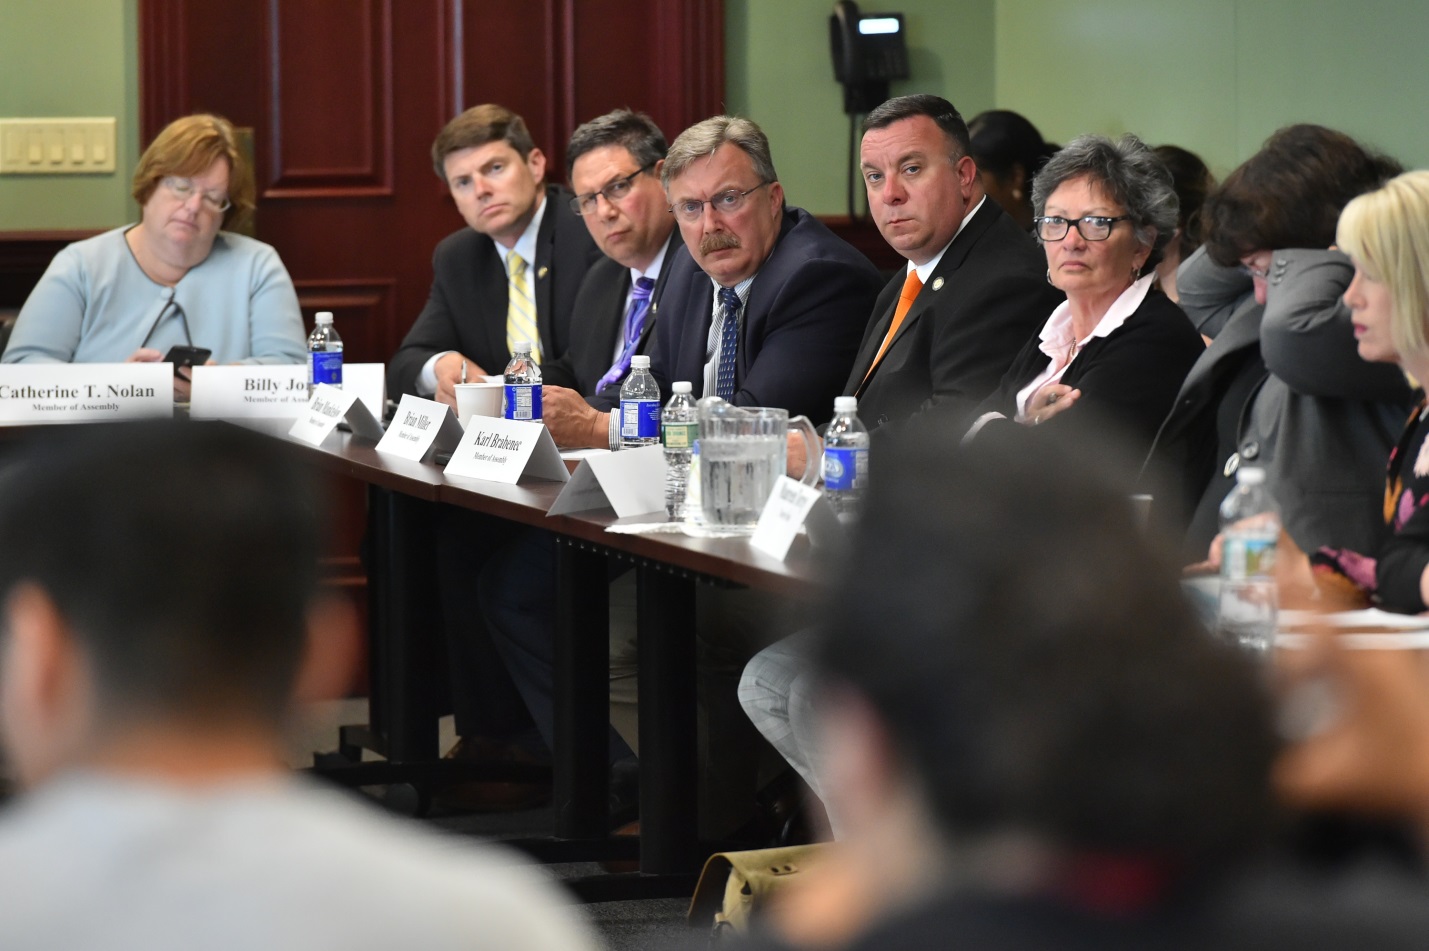 Assemblyman Brian Manktelow, R,C,I,Ref 130-Lyons, third from right, listens during a roundtable discussion on the Farmerworker labor bill on May 28 in Albany.